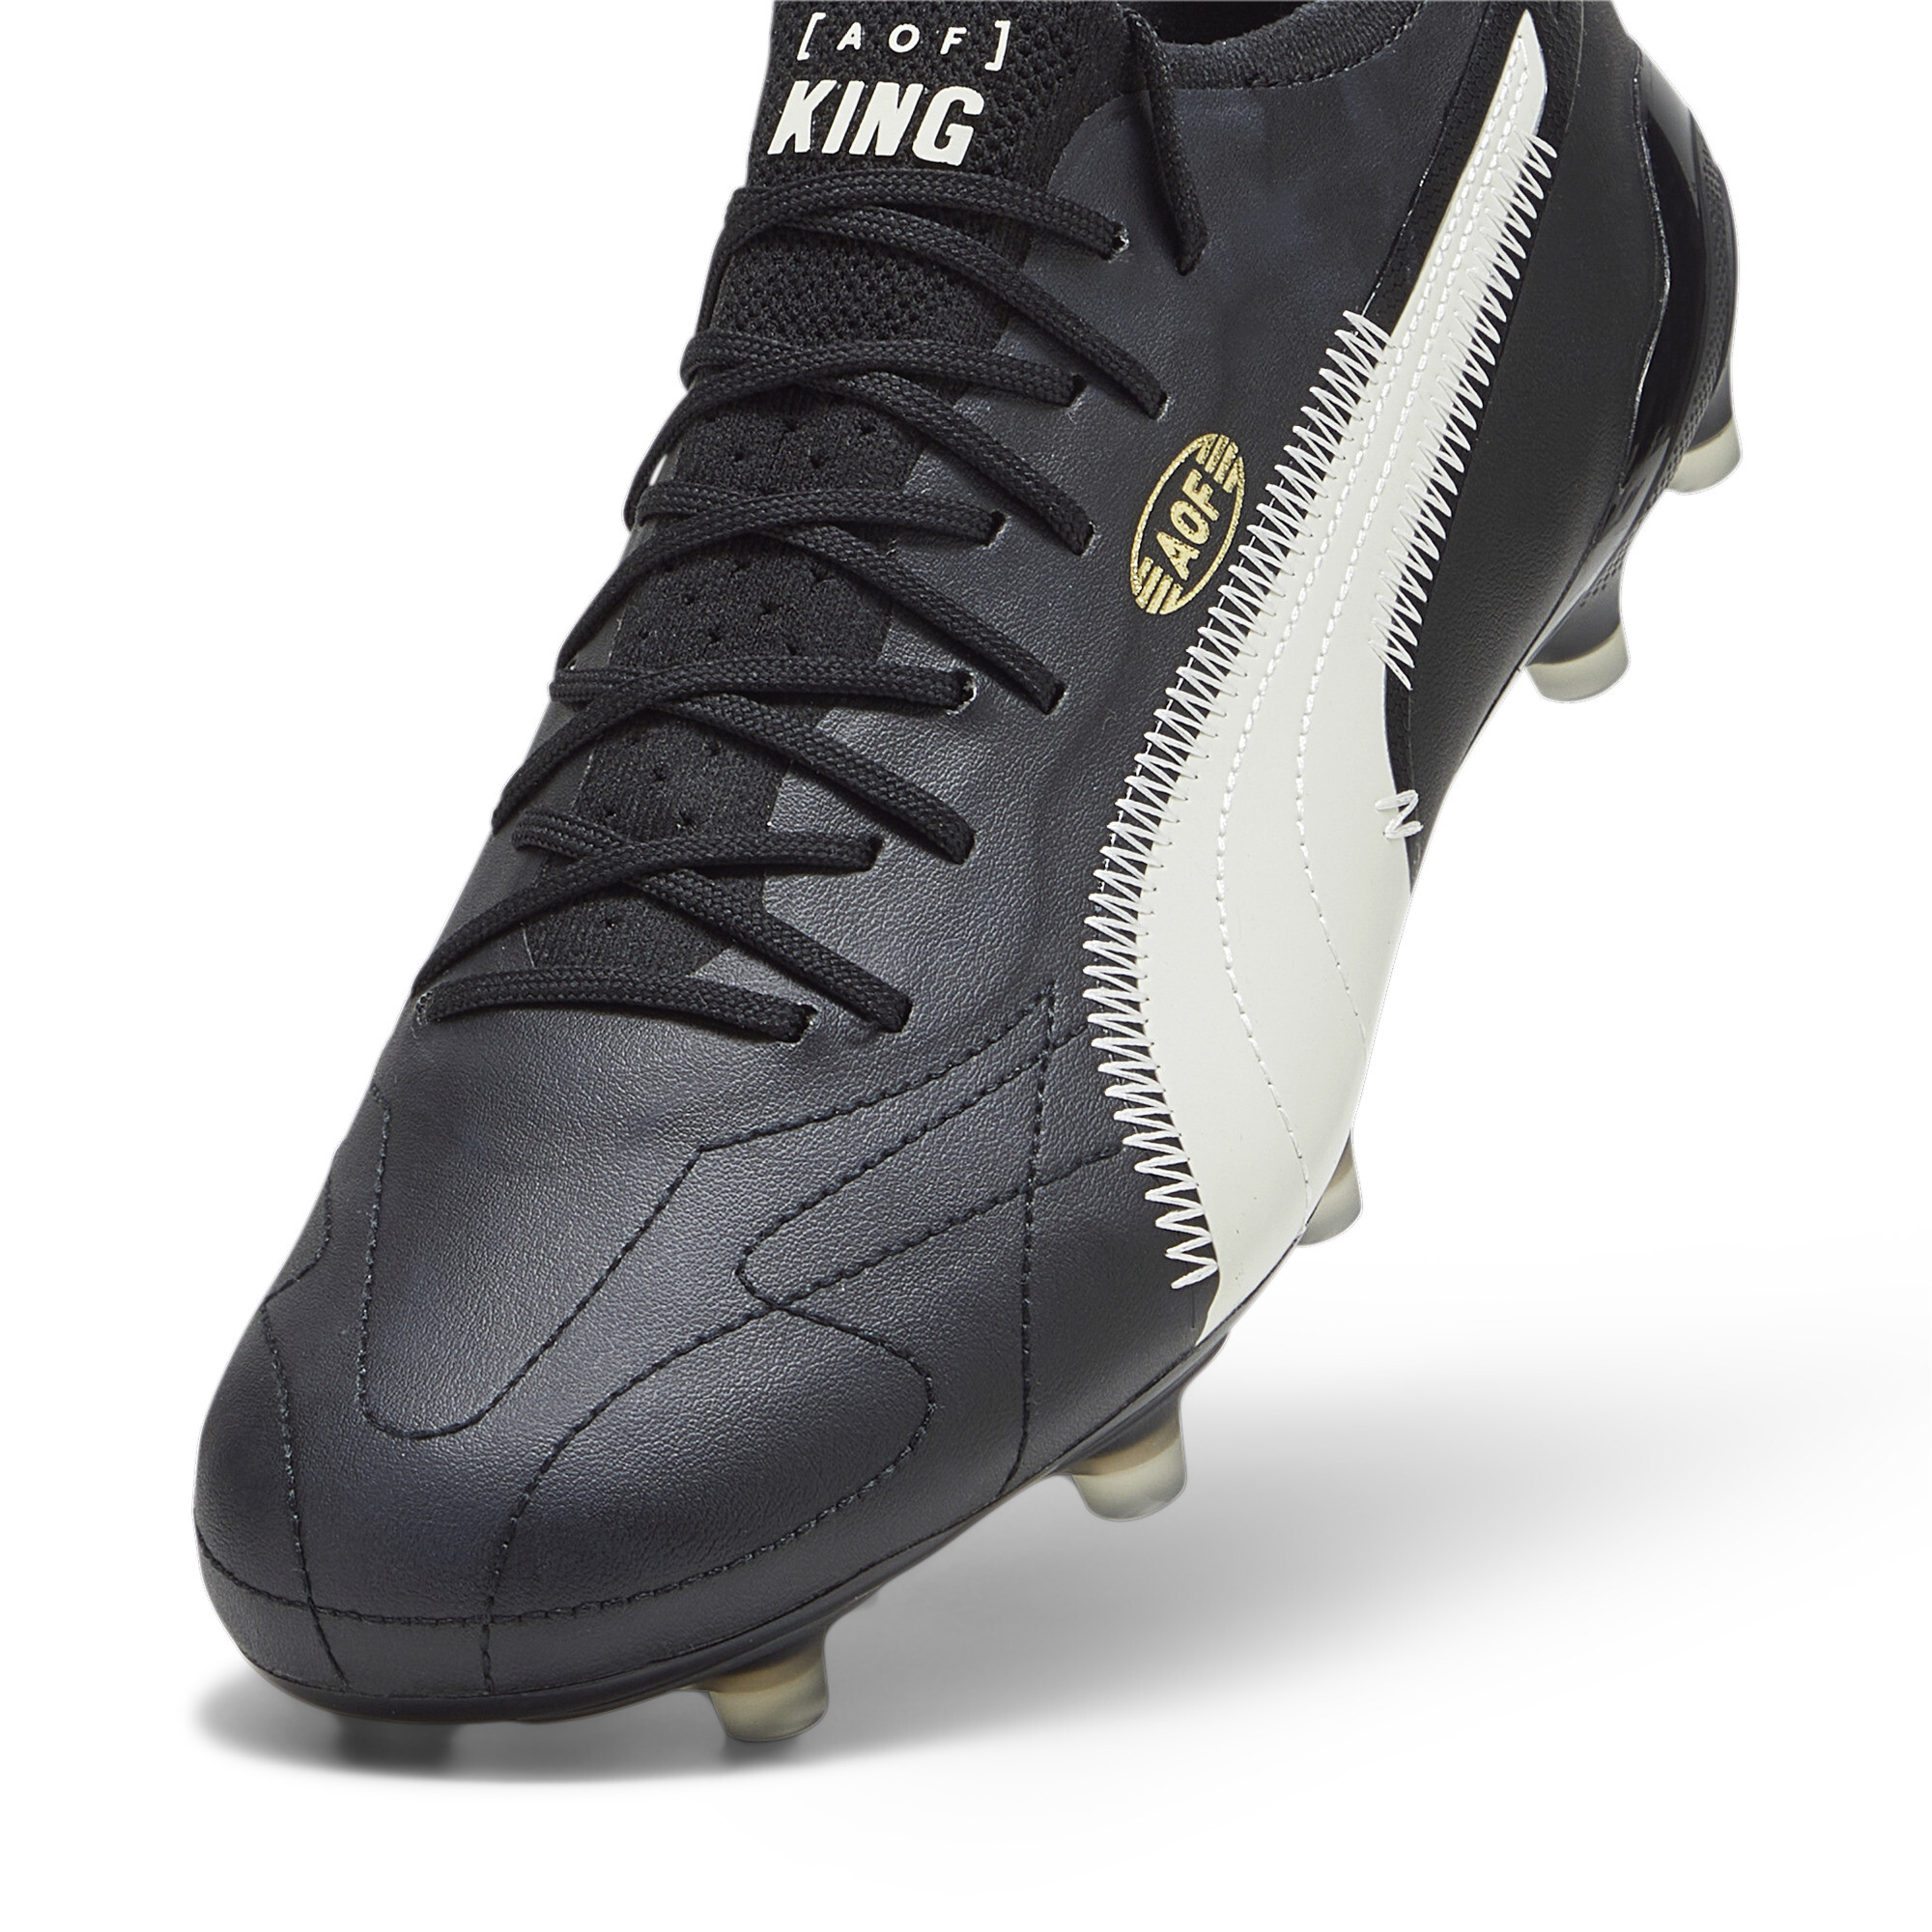 Men's PUMA KING ULTIMATE ART OF FOOTBALL FG/AG Football Boots In Black/Gold, Size EU 42